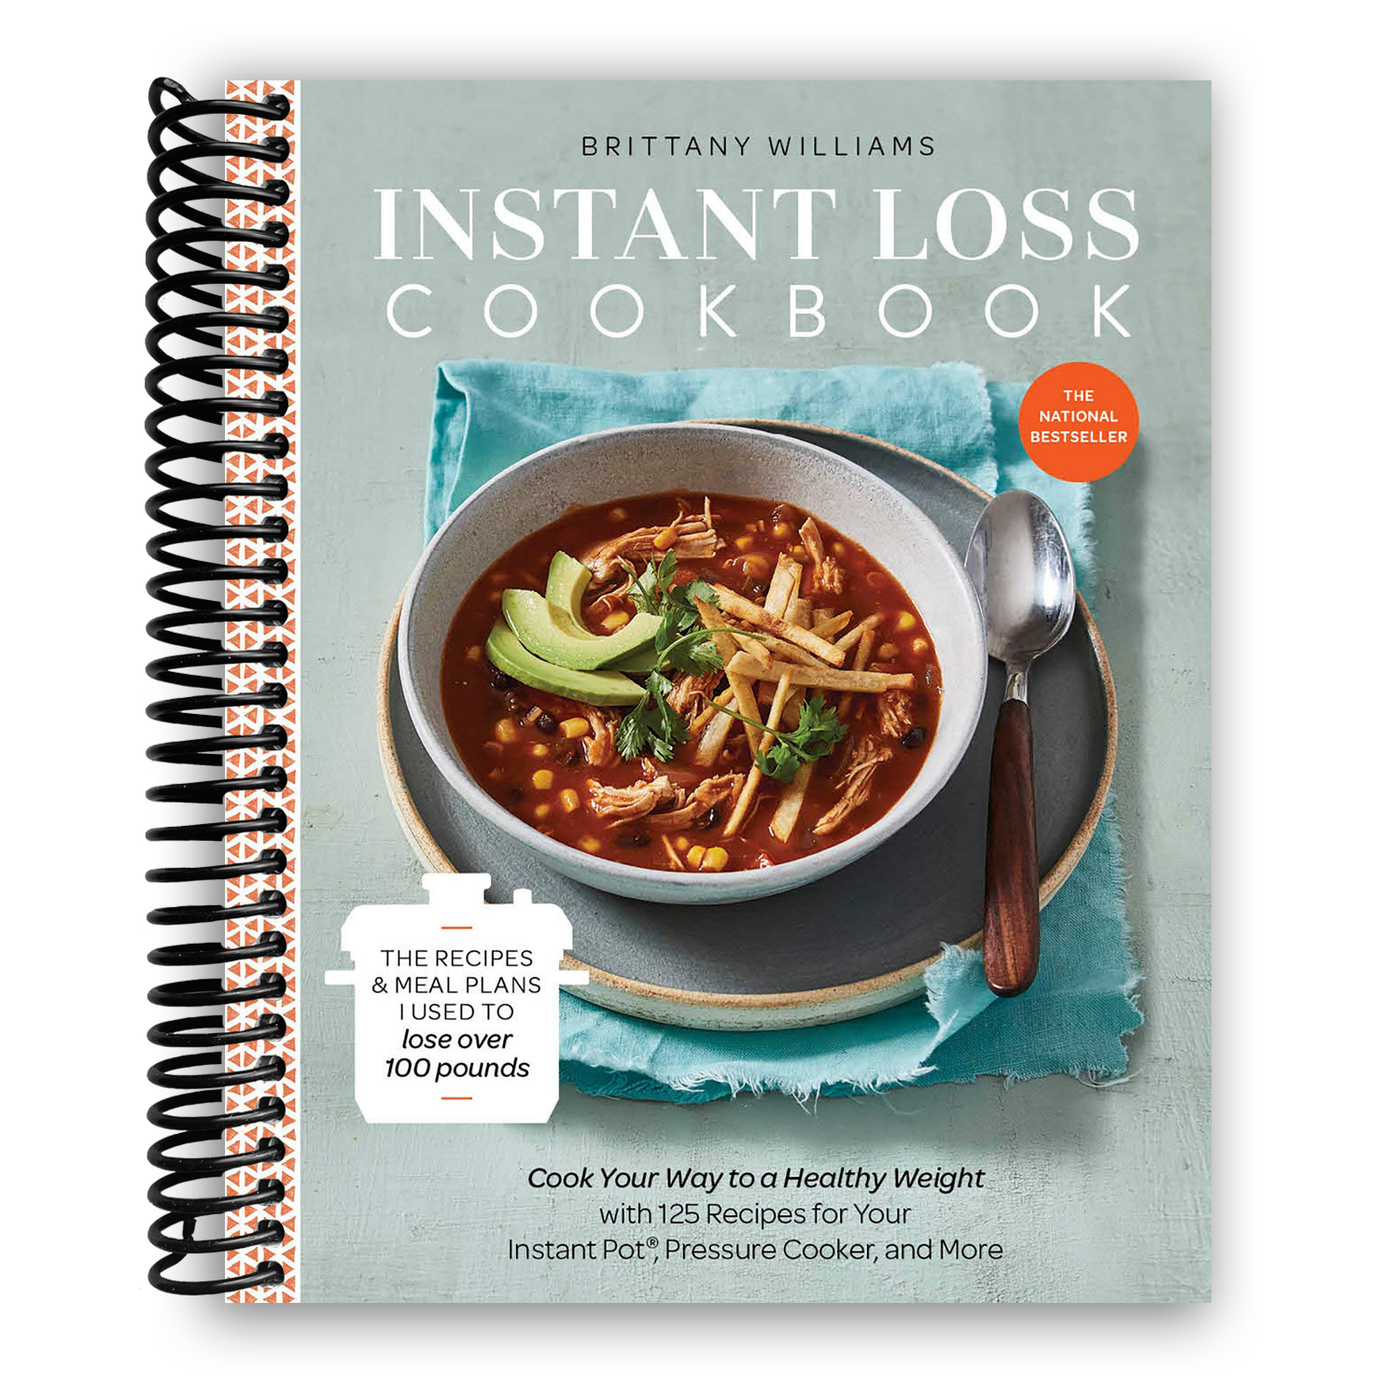 Instant Loss Cookbook: Cook Your Way to a Healthy Weight with 125 Recipes for Your Instant Pot®, Pressure Cooker, and More (Spiral Bound)